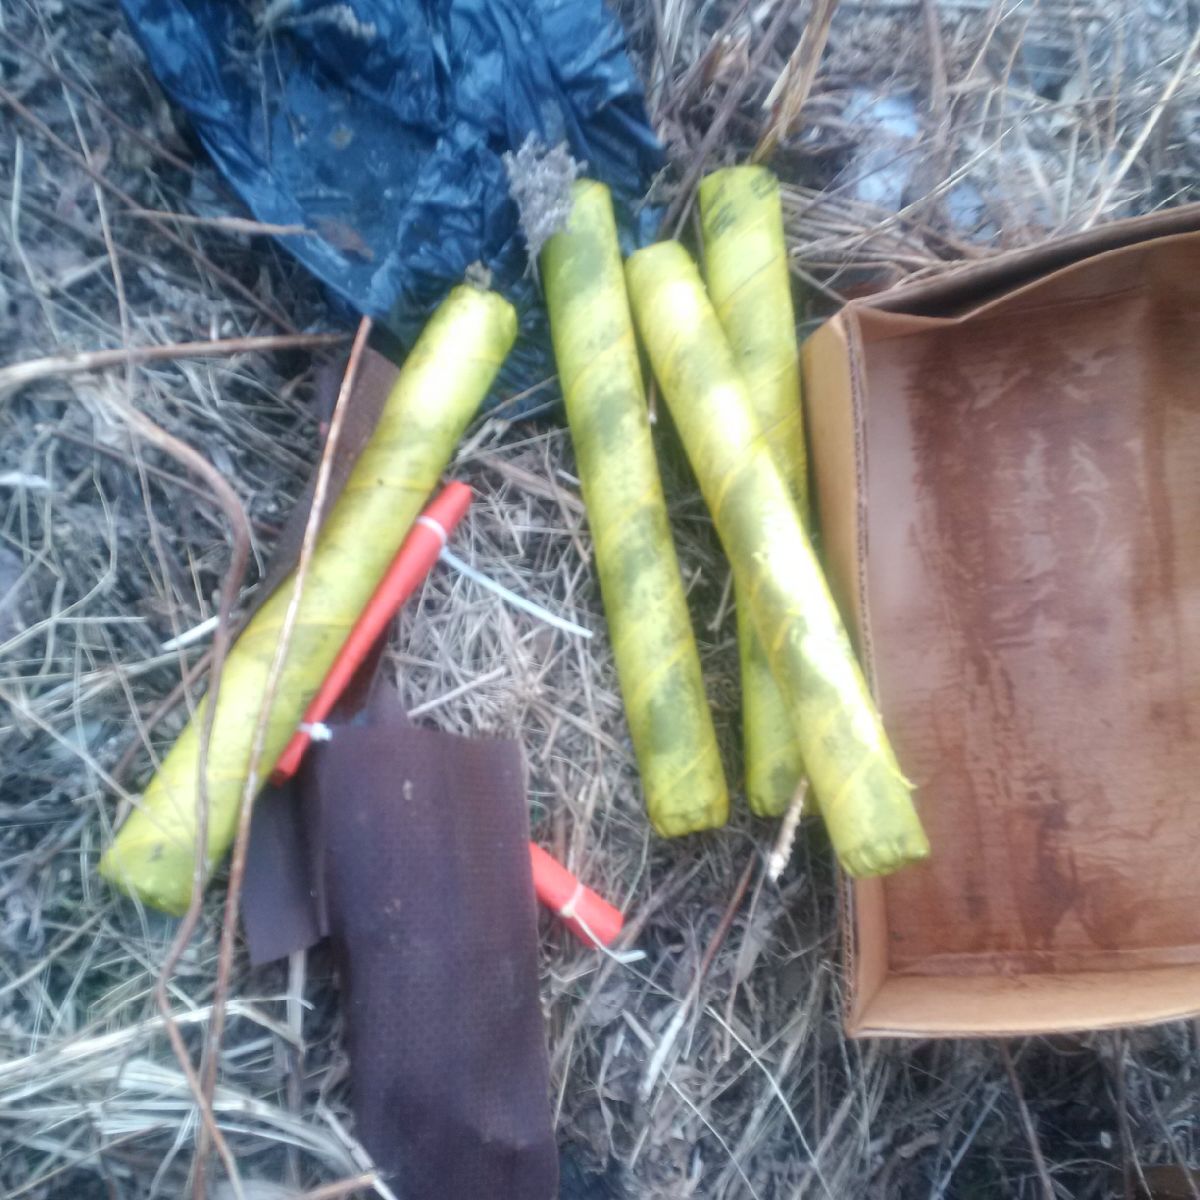 The box of explosives was discovered in a vacant lot in the small town .